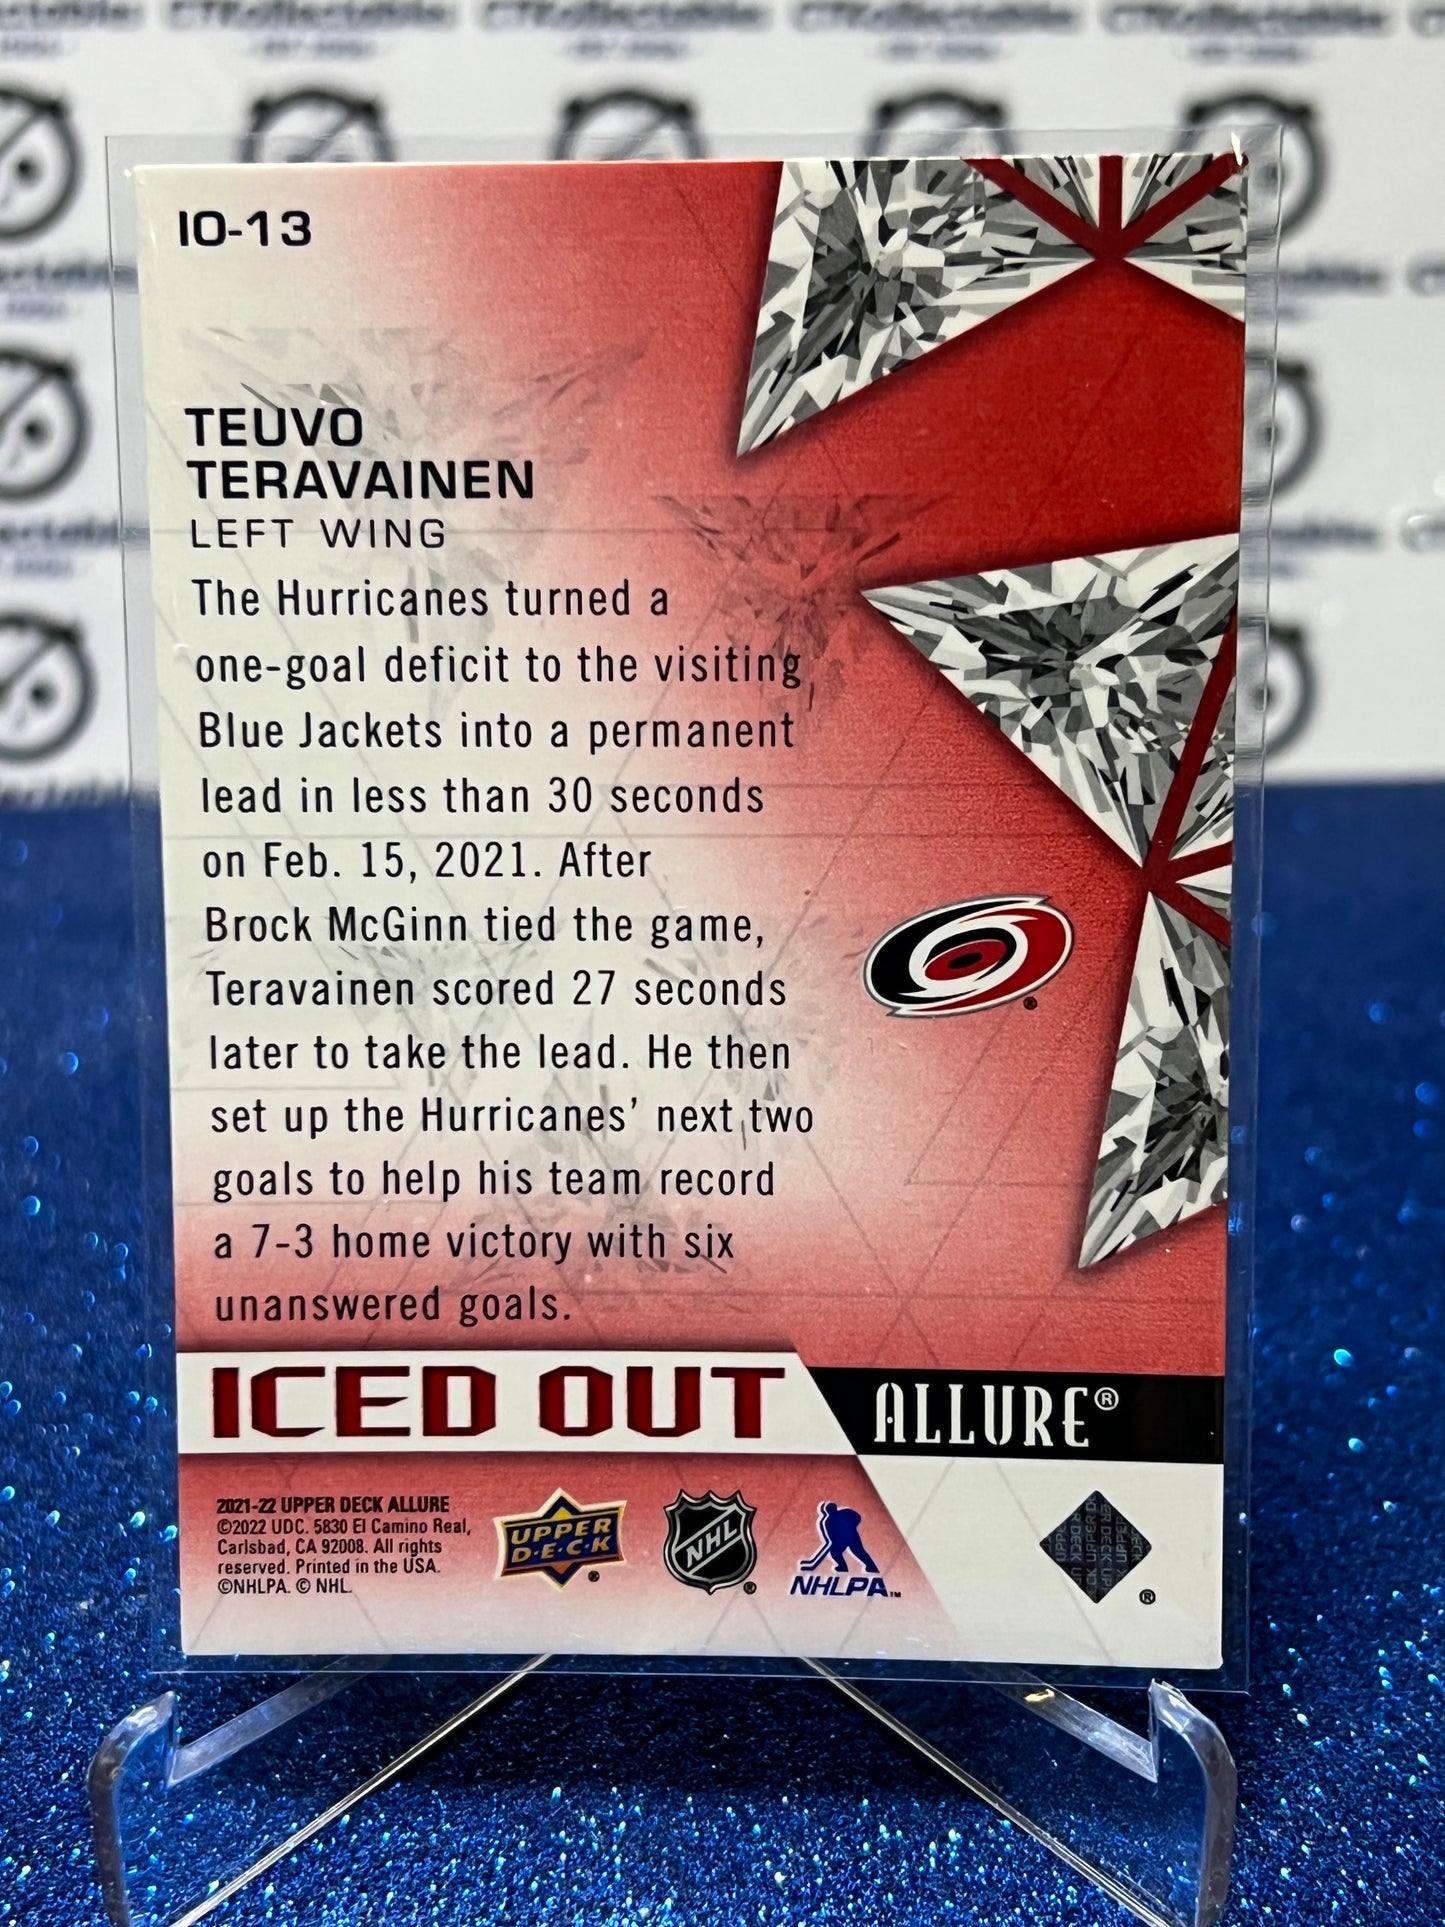 2021-22 UPPER DECK ALLURE TEUVO TERAVAINEN # IO-13 ICED OUT CAROLINA HURRICANES NHL HOCKEY TRADING CARD